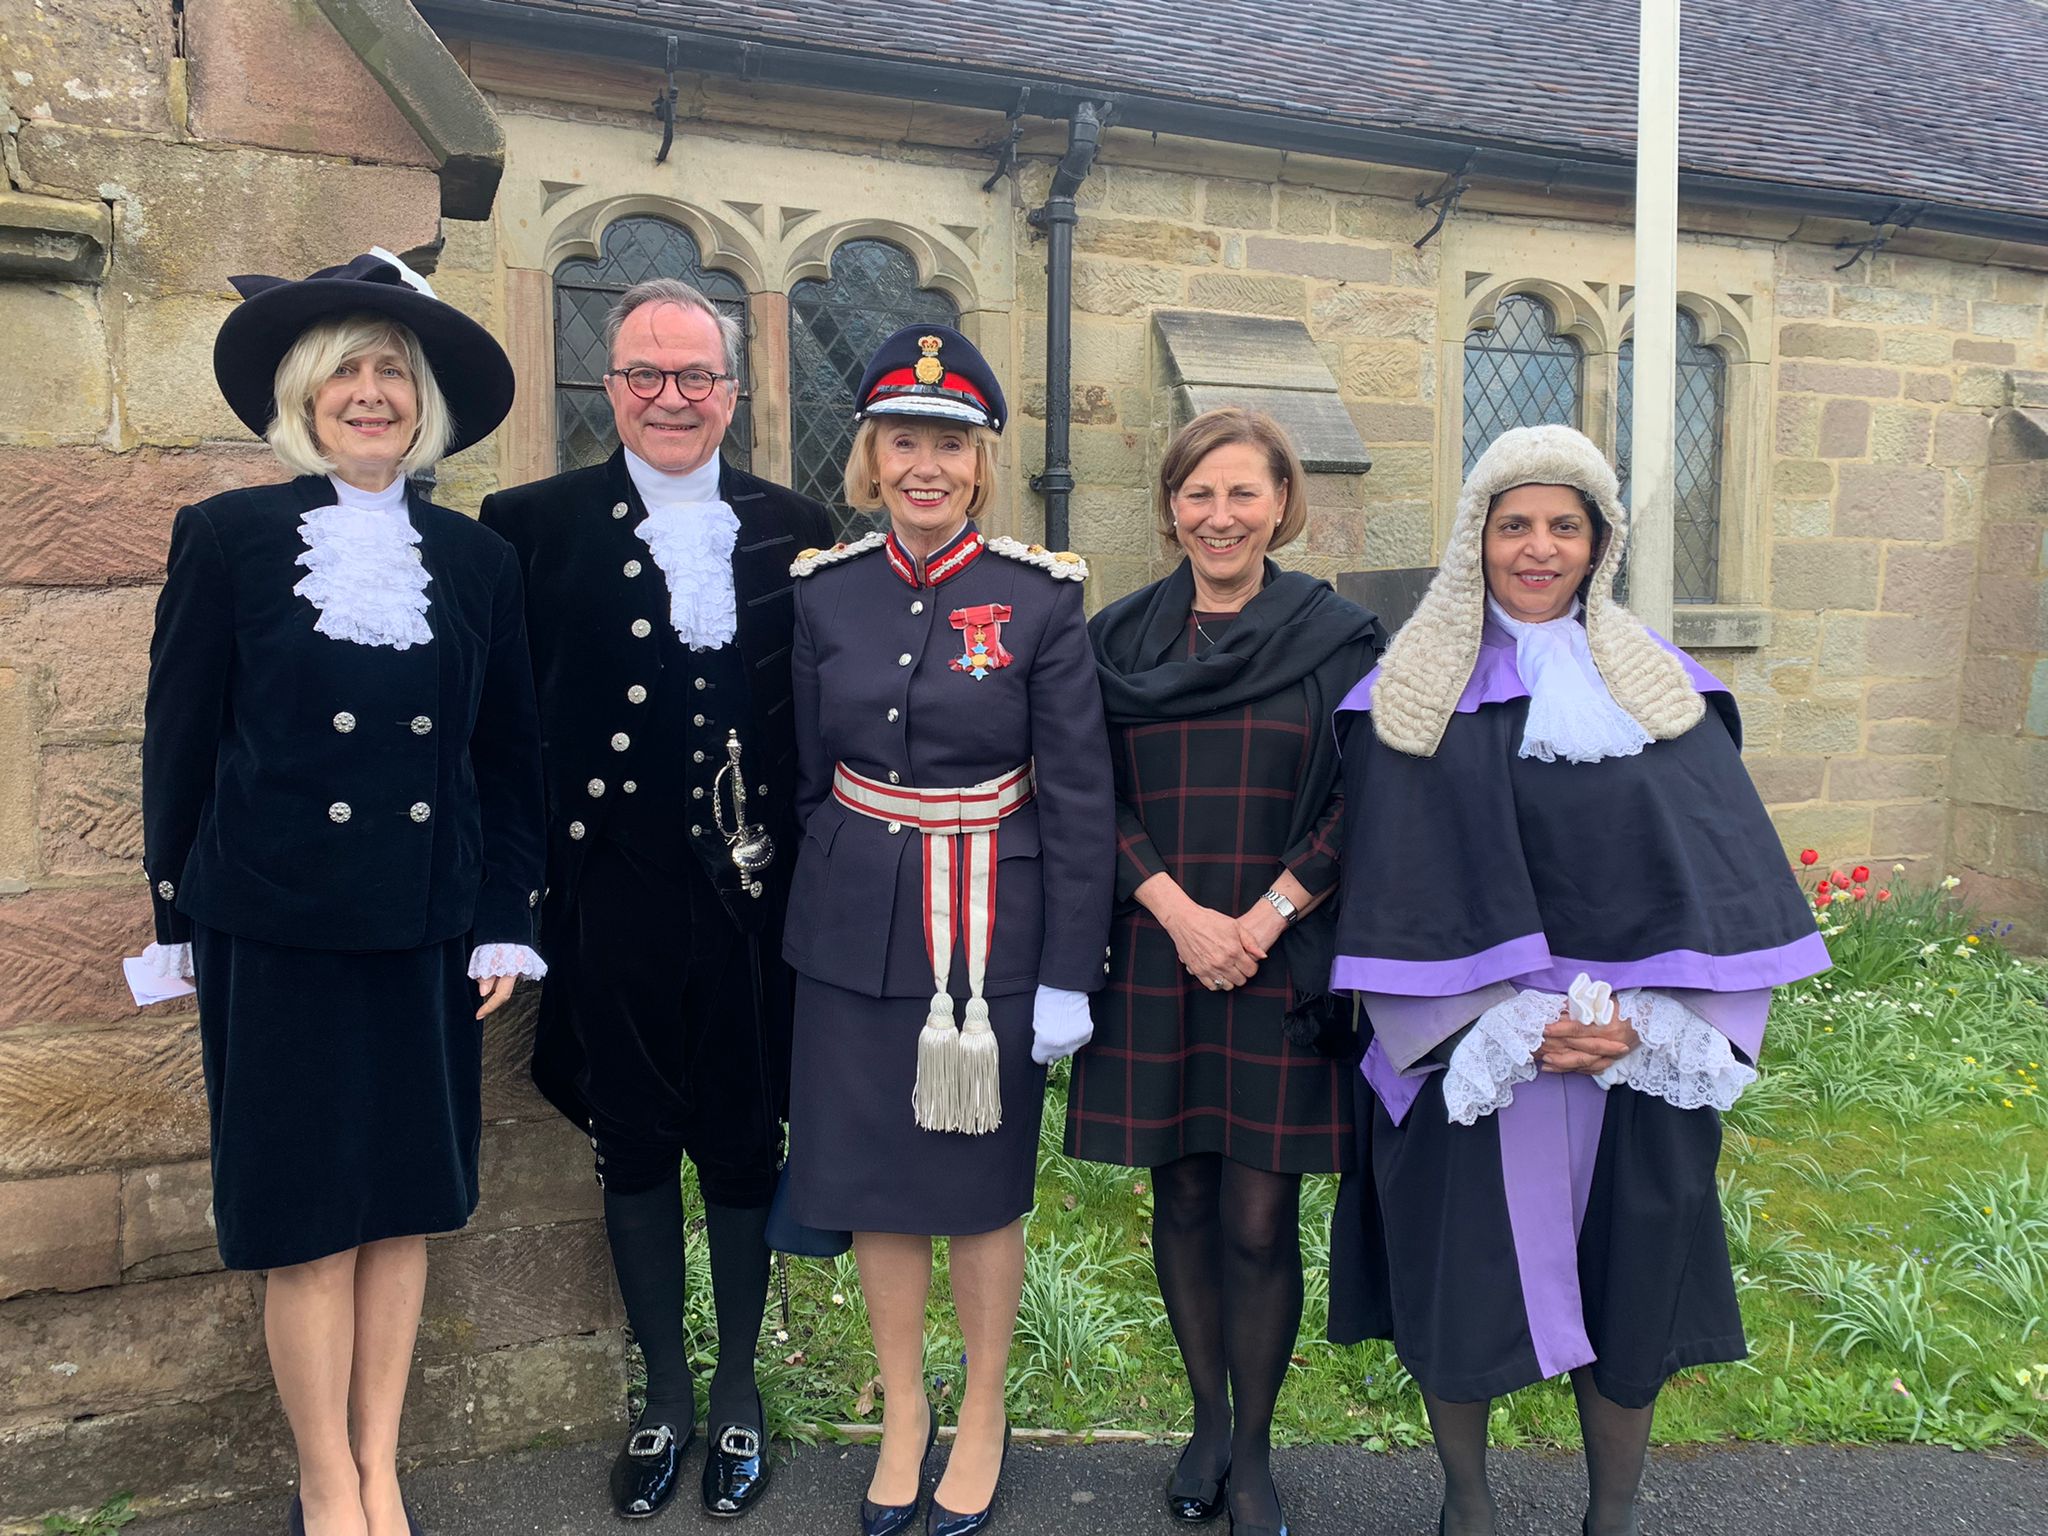 Marketing Derby co-founder becomes new High Sheriff